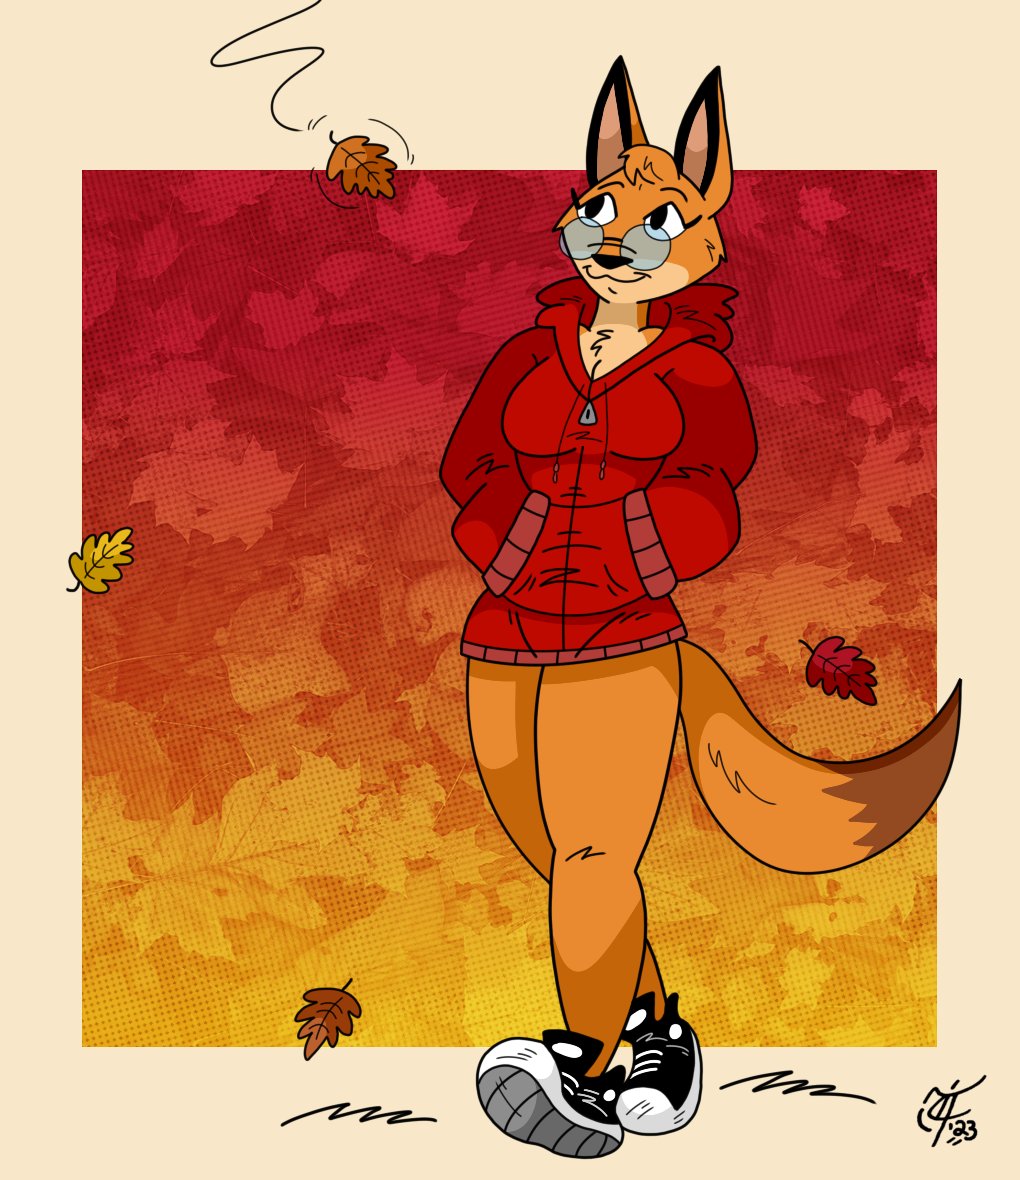 A Fall-themed pinup commission for @edtropolis of his foxy lady, Melanie, taking a stroll among the changing foliage 🦊🍂🧡😉 #Melanie #HappyMart #vixen #anthrofurry #autumncolors #autumnstroll #fallleaves #fallvibes #redhoodie #ocart #pinup #commissionart